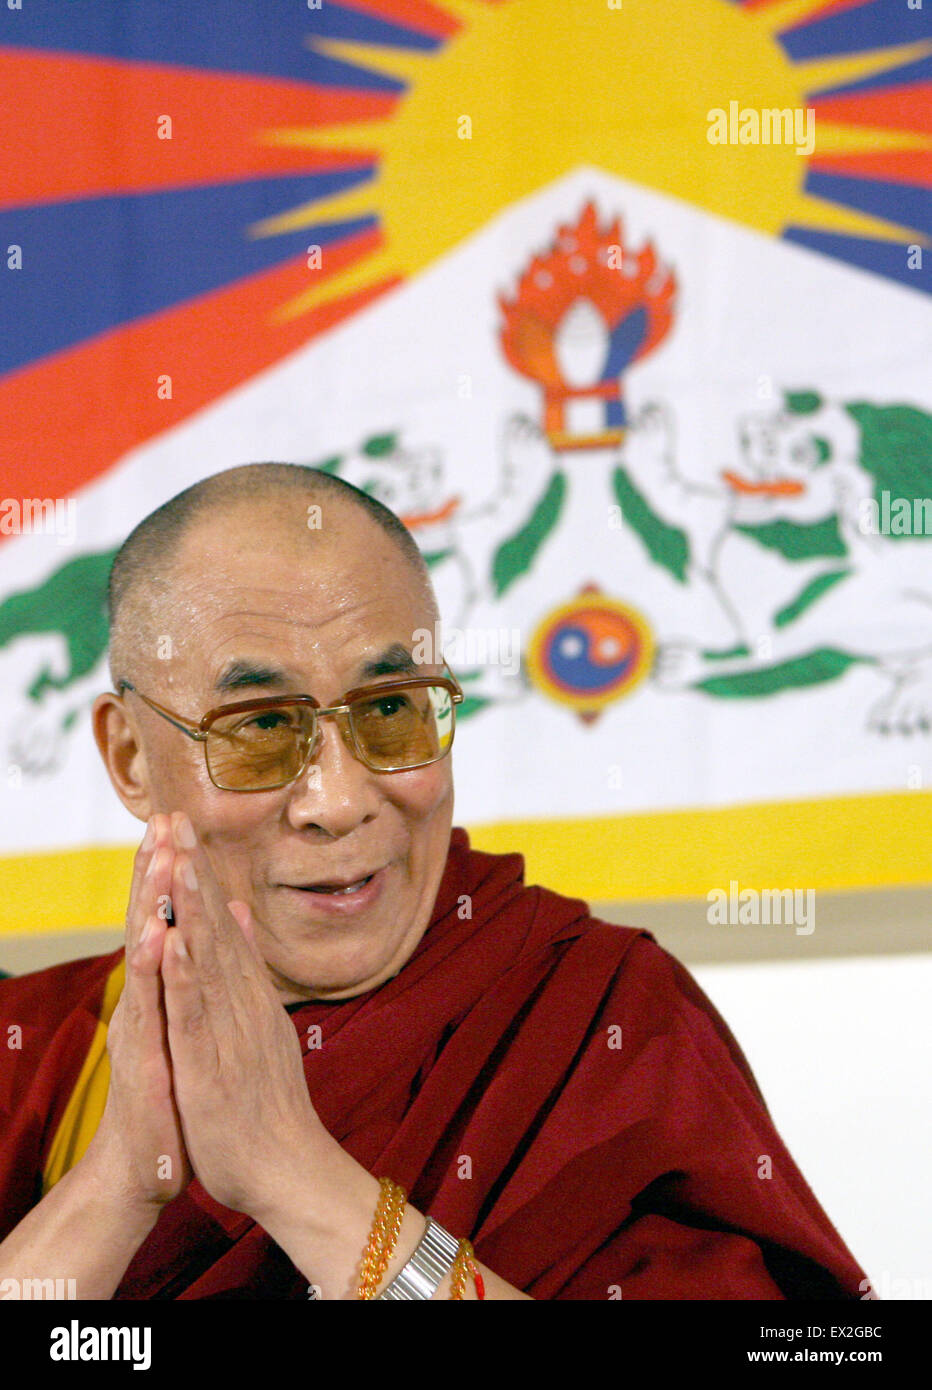 Bochum, Germany. 16th May, 2008. The Dalai Lama sits in front of a Tibetan flag and smiles during a press conference in Bochum, Germany, 16 May 2008. The spiritual and political leader of the Tibetan people is currently on a five-day-visit to Germany. Photo: FEDERICO GAMBARINI/dpa/Alamy Live News Stock Photo